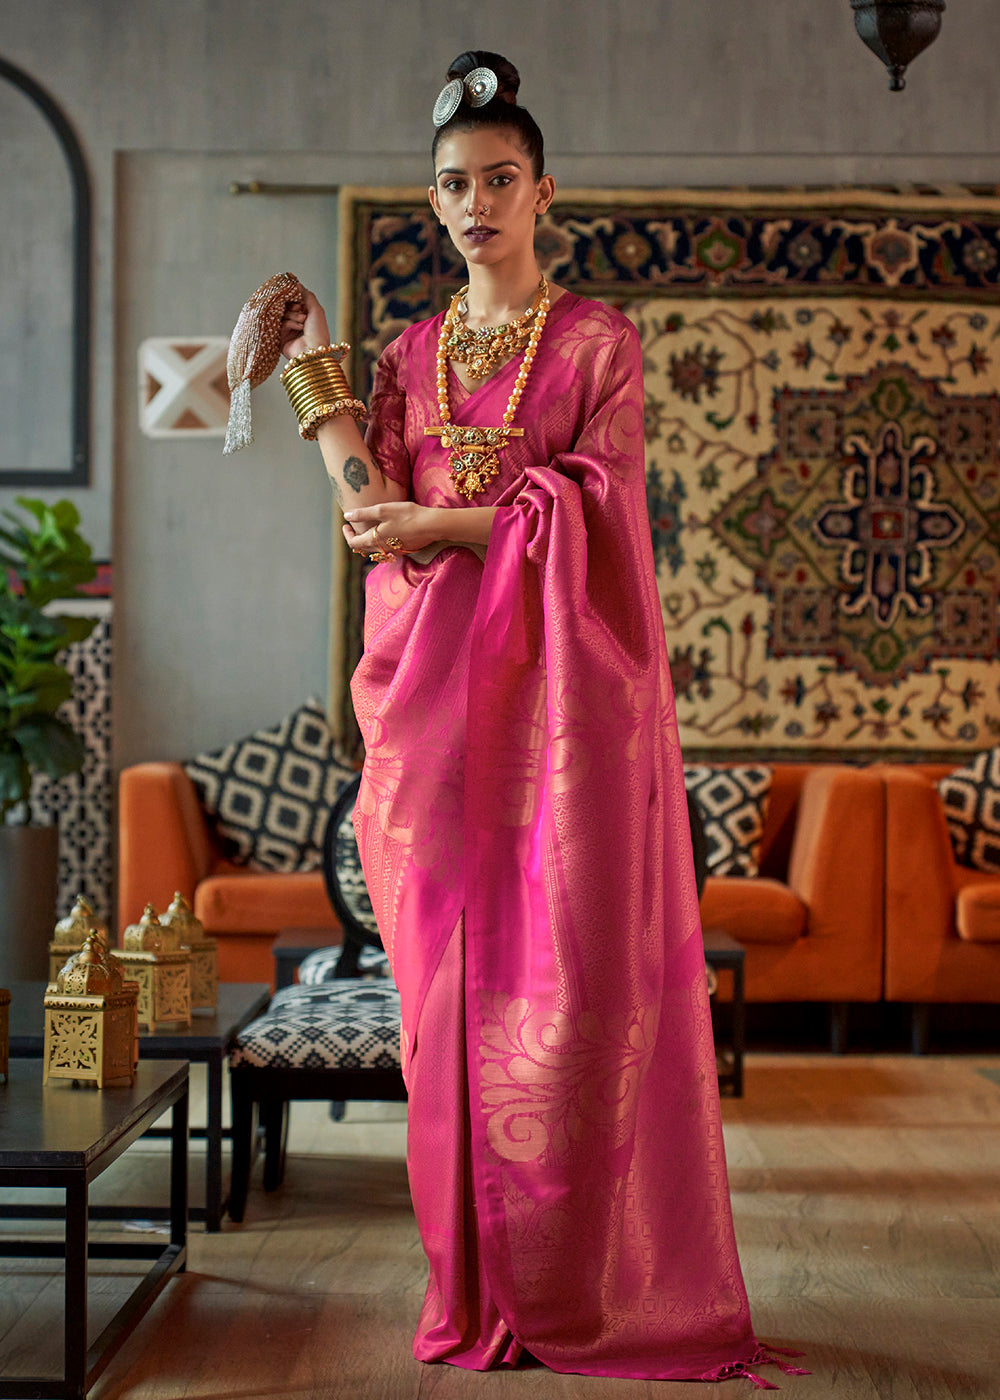 Buy Now Pretty Pink Blended Woven Zari Brocade Silk Saree Online in USA, UK, Canada & Worldwide at Empress Clothing.